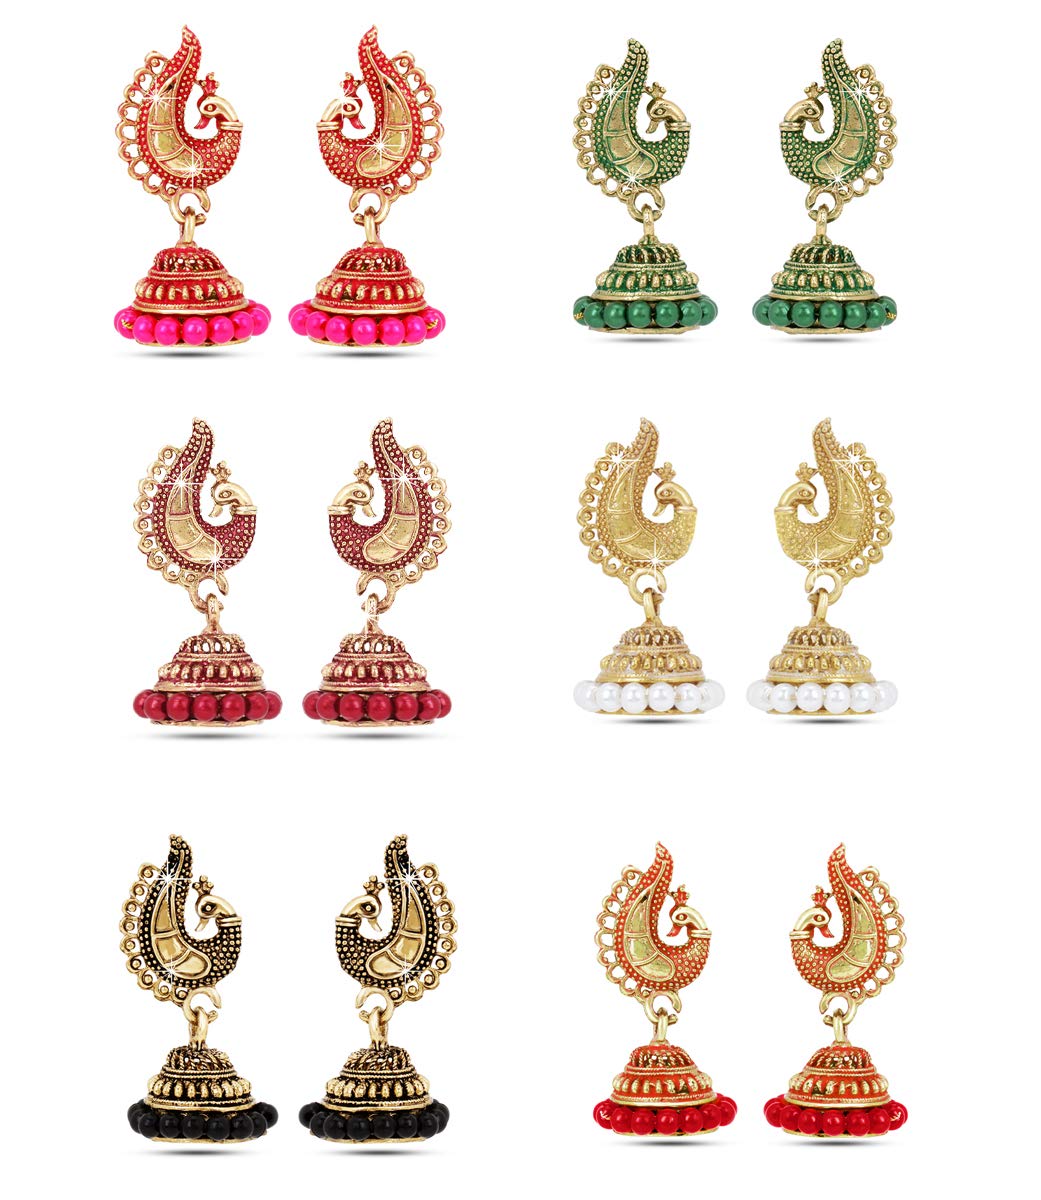 Yellow Chimes Combo of 6 Pair's Gold Toned Multicolor Traditional Peacock Jhumki/Jhumka Earring Sets For Women and Girls